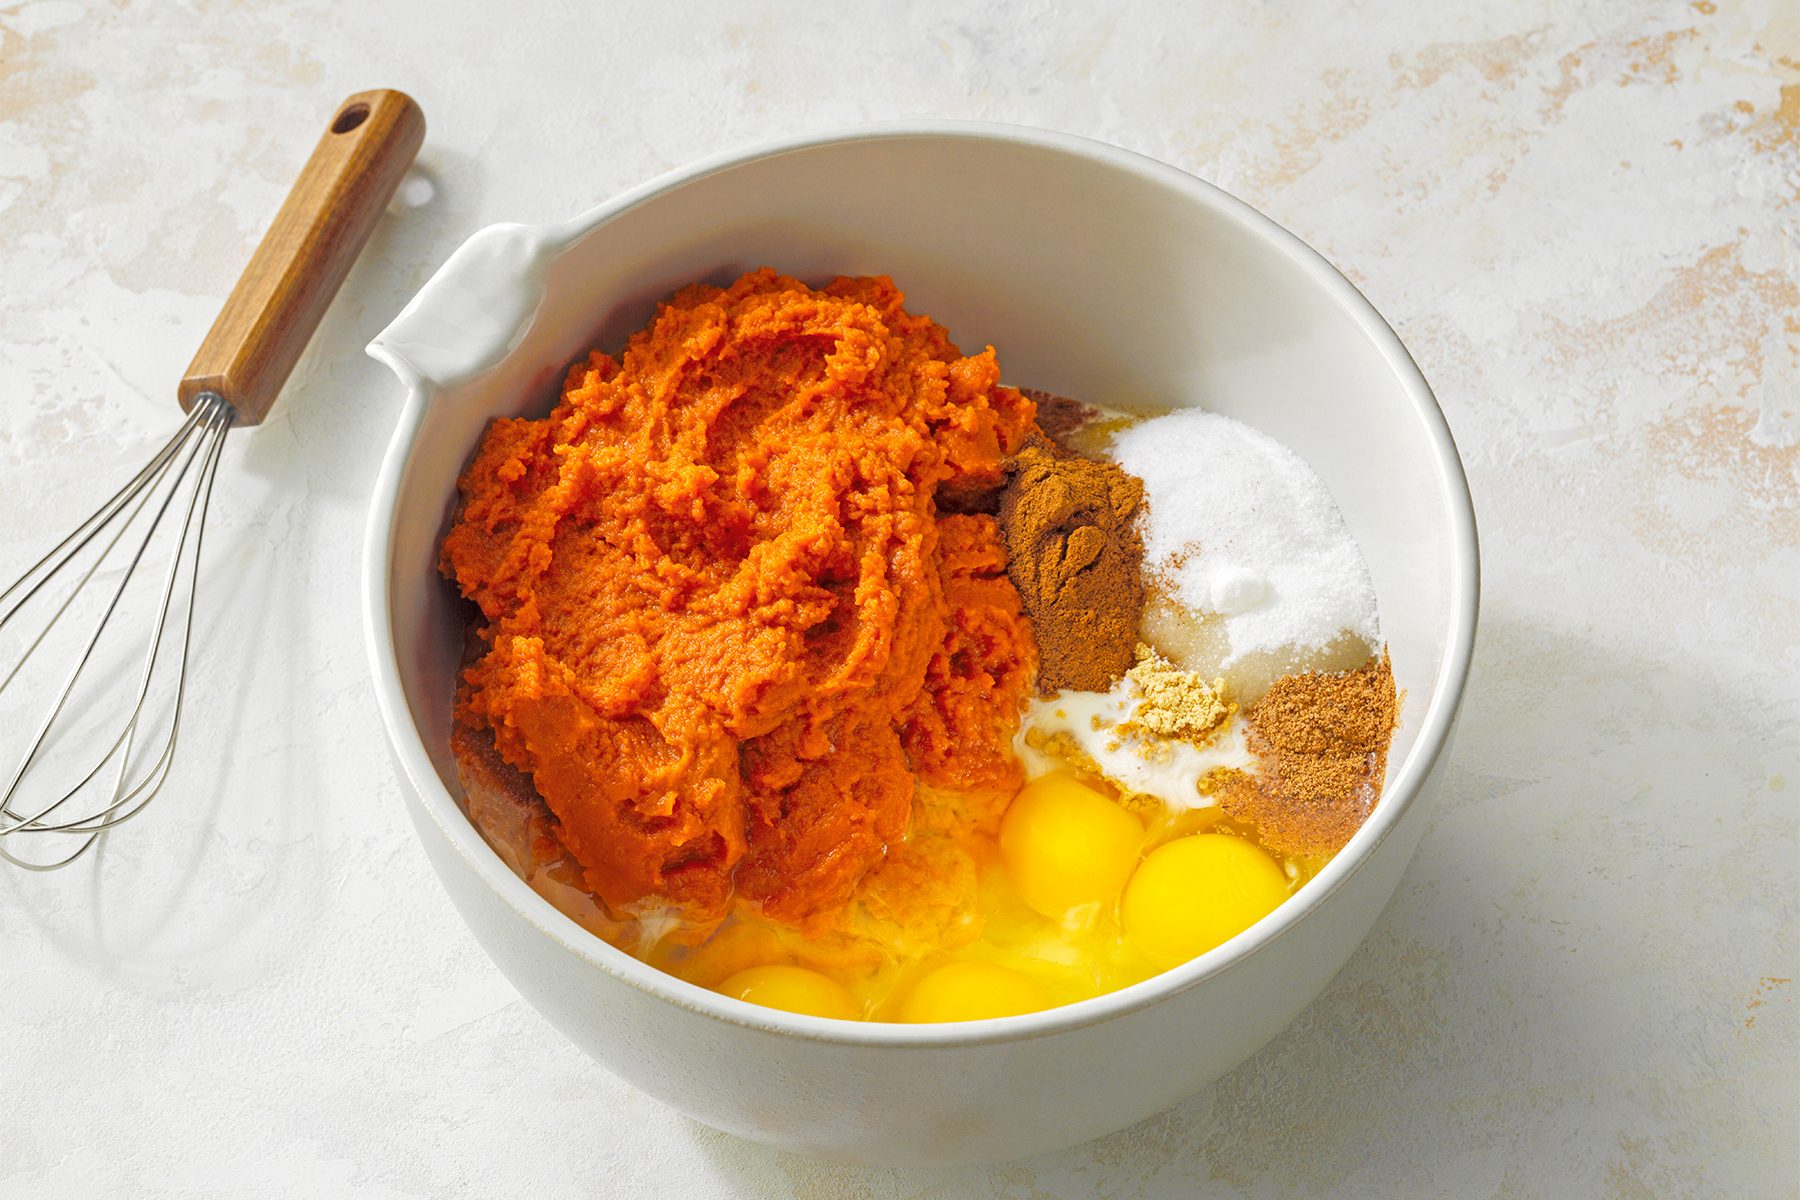 A large white mixing bowl contains a combination of orange pumpkin puree, four cracked eggs, granulated sugar, ground cinnamon, nutmeg, and a brown spice